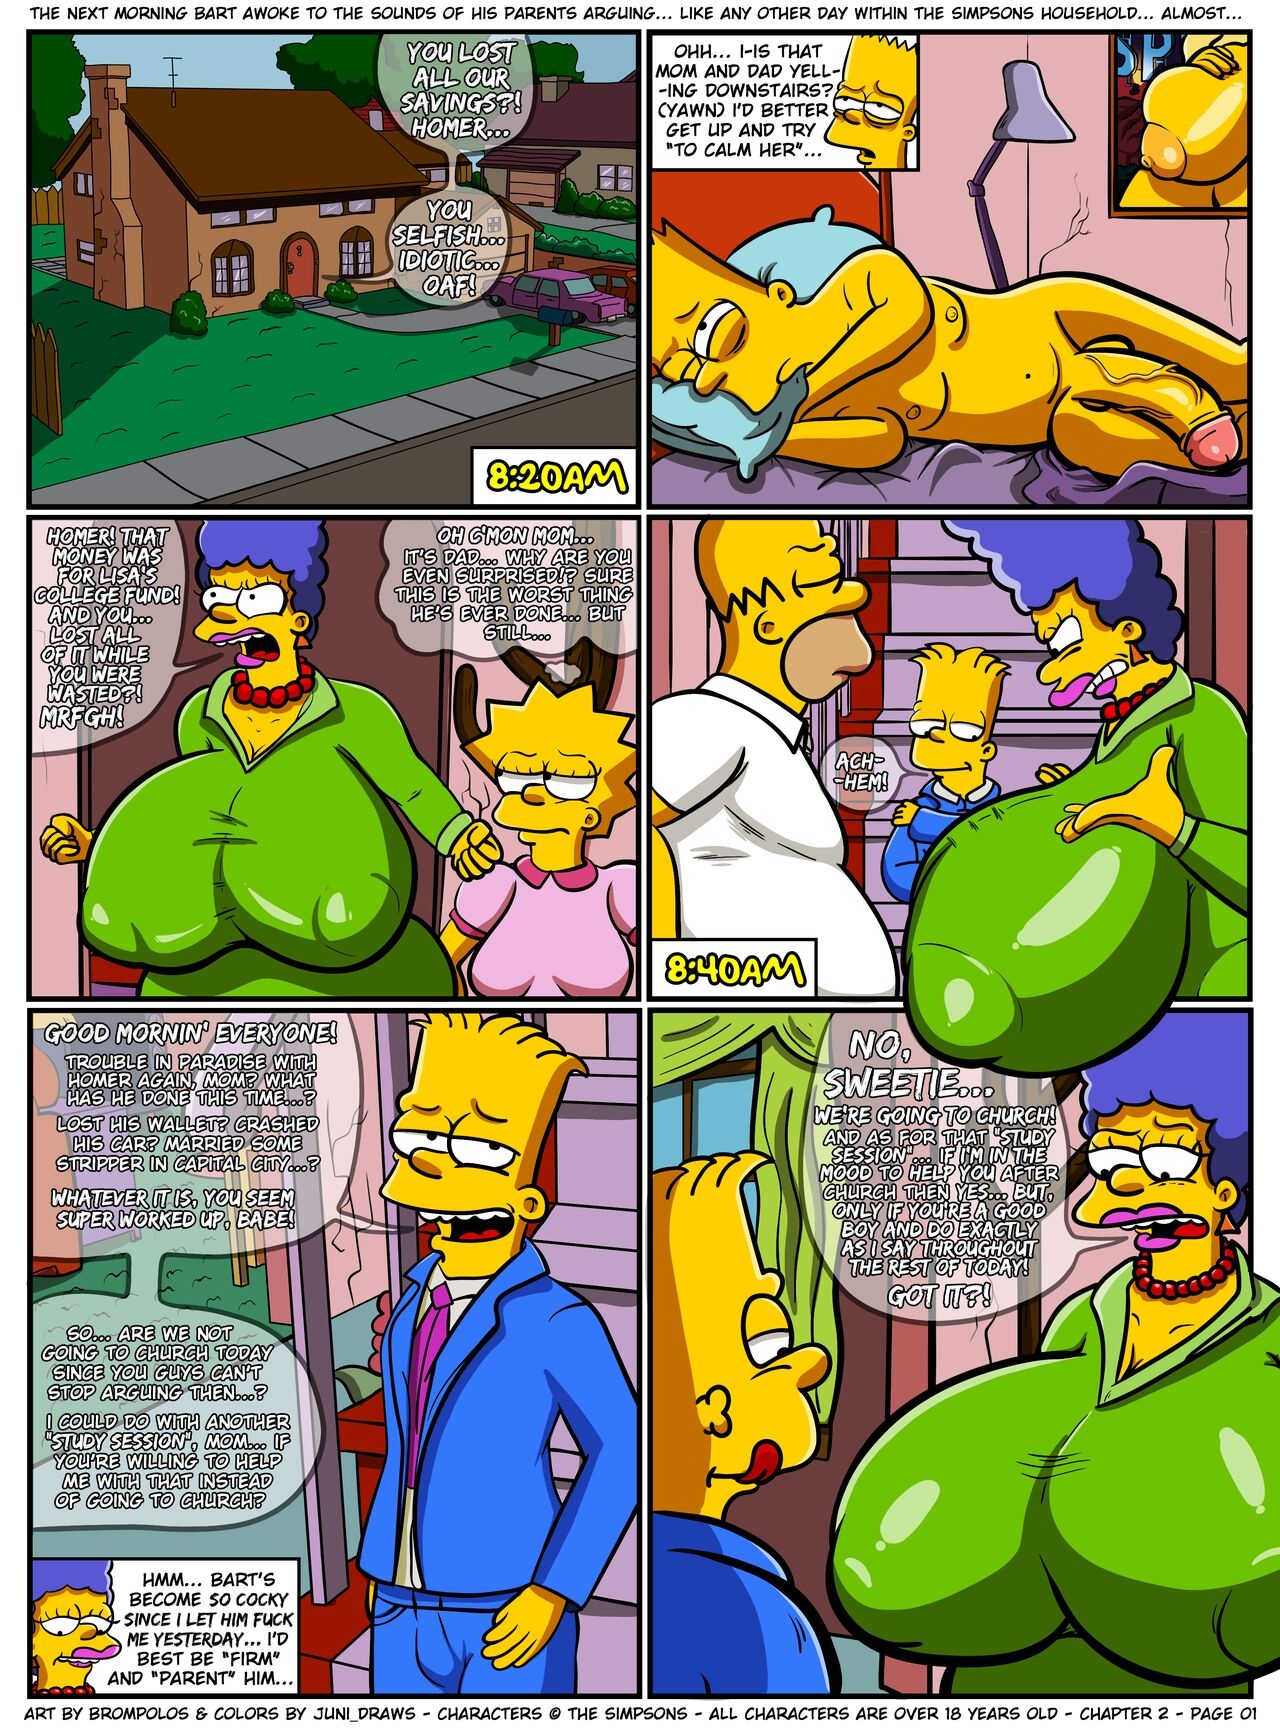 [Brompolos/Juni_Draws] The Sexensteins (Simpsons) [Ongoing] 49